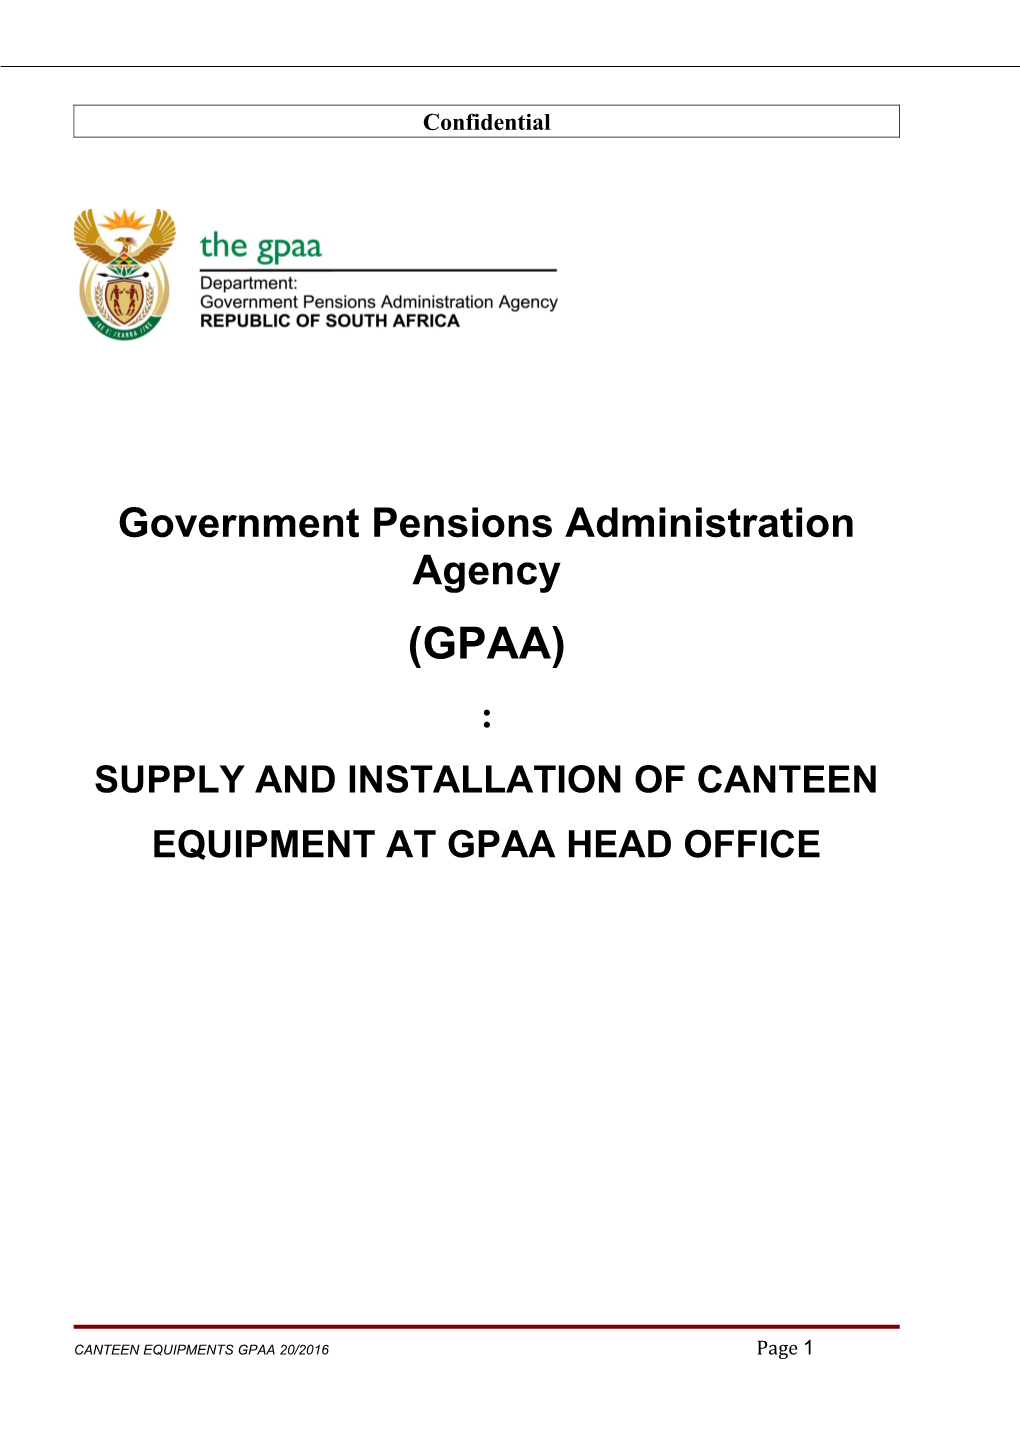 Supply and Installation of Canteen Equipment at Gpaa Head Office